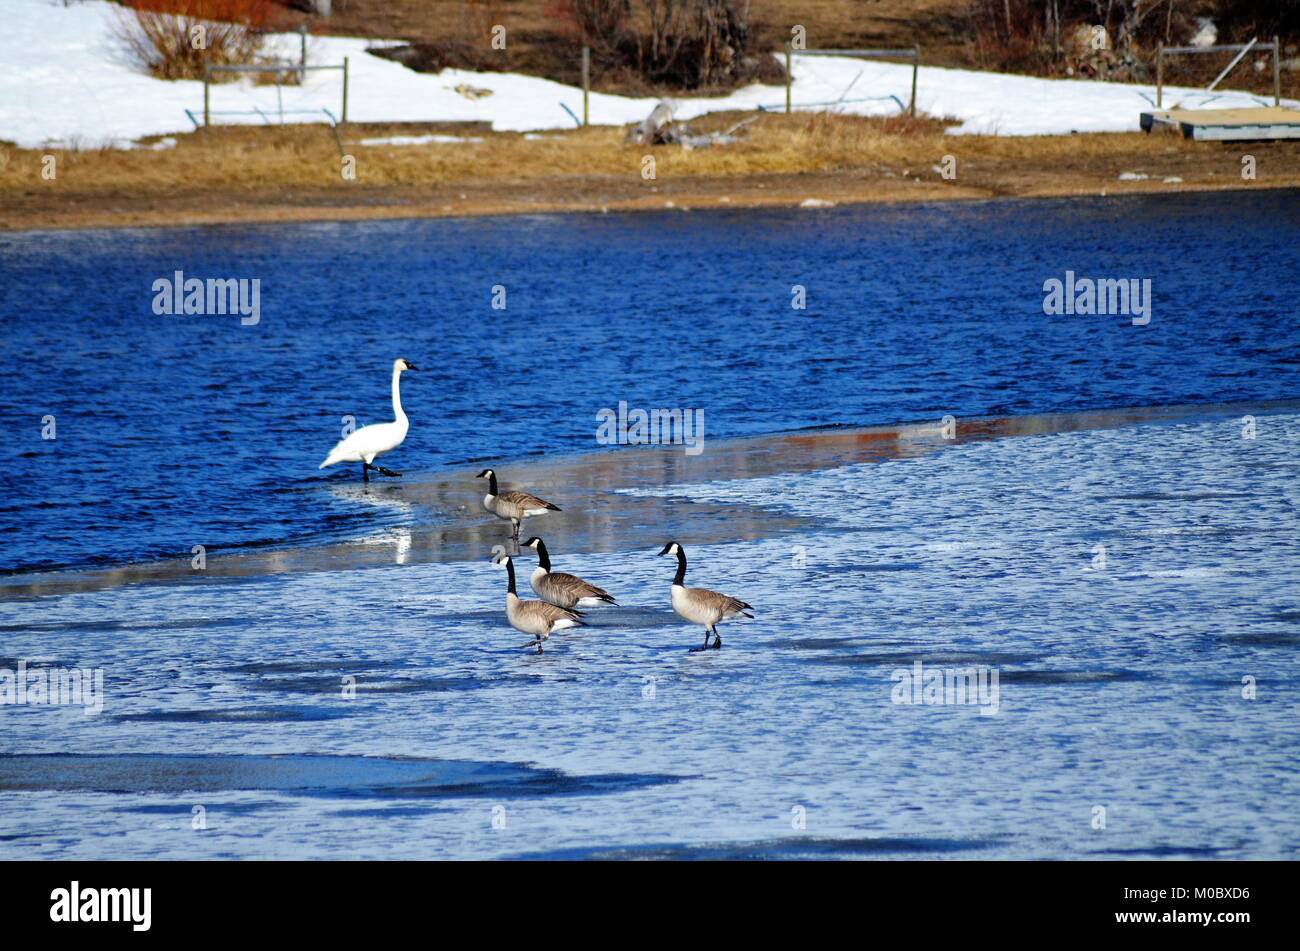 A white trumpeter swan steps out of the blue water and onto the thin ice, where four Canadian geese also stand and rest Stock Photo